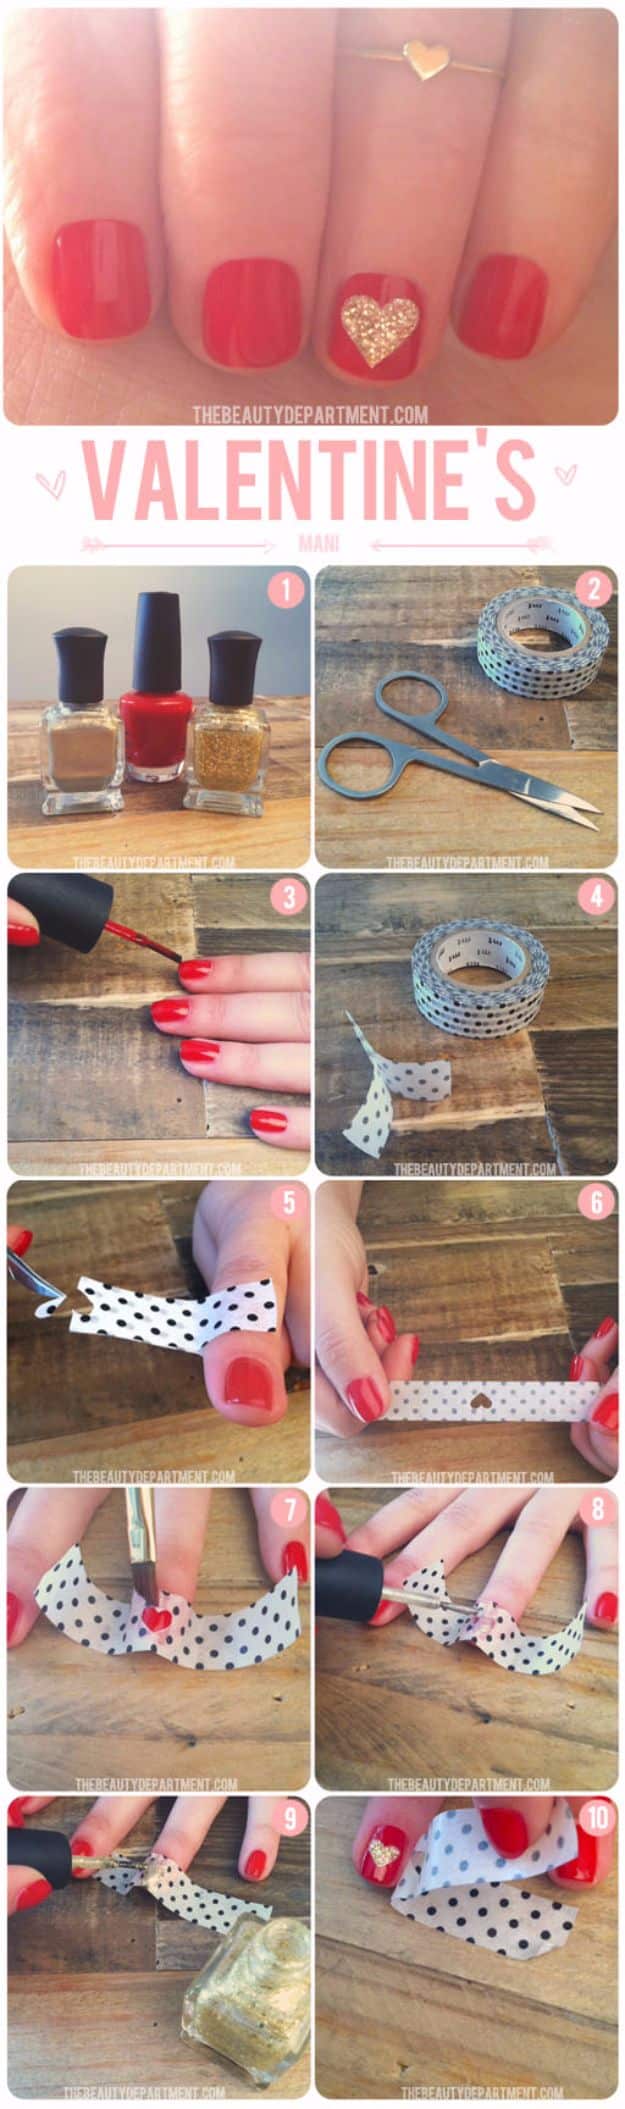 Quick Nail Art Ideas - Washi Tape Glitter Heart - Easy Step by Step Nail Designs With Tutorials and Instructions - Simple Photos Show You How To Get A Perfect Manicure at Home - Cool Beauty Tips and Tricks for Women and Teens 